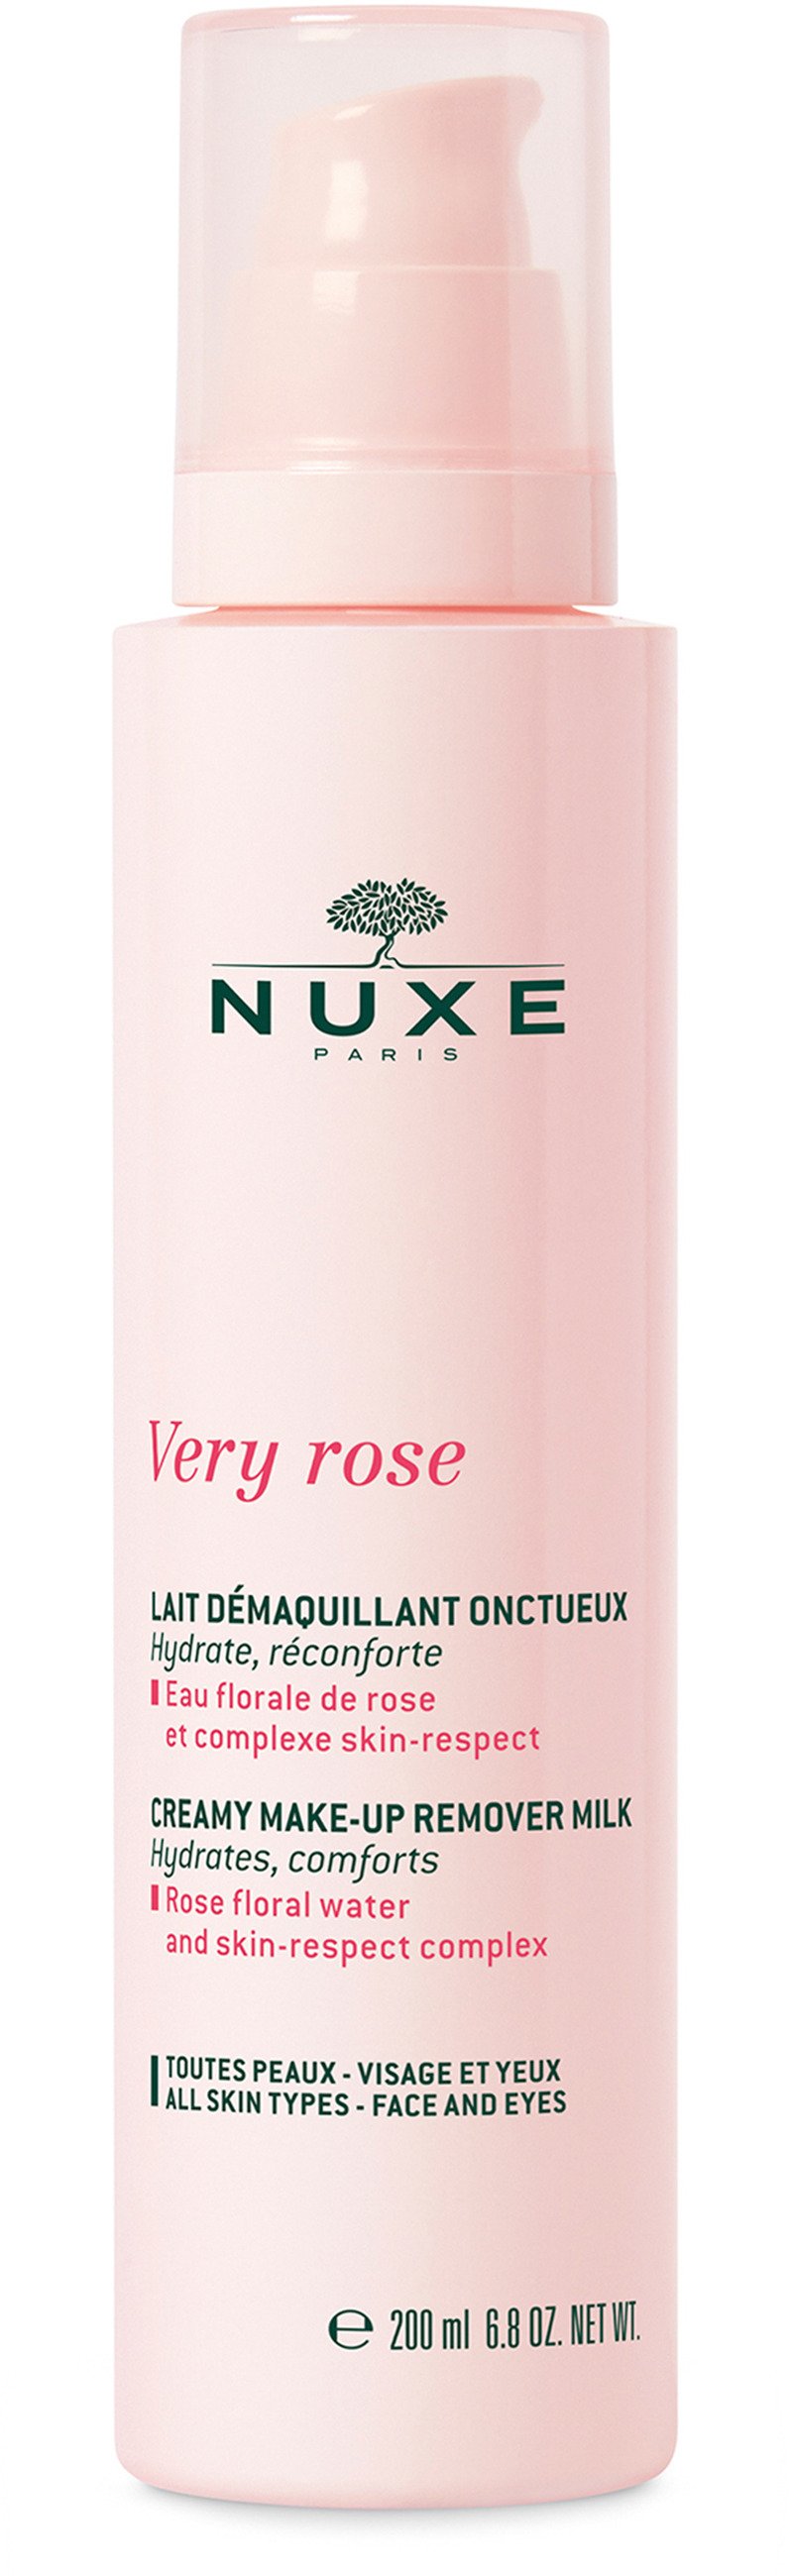 Nuxe Very Rose Make-Up Remover Milk 200 ml